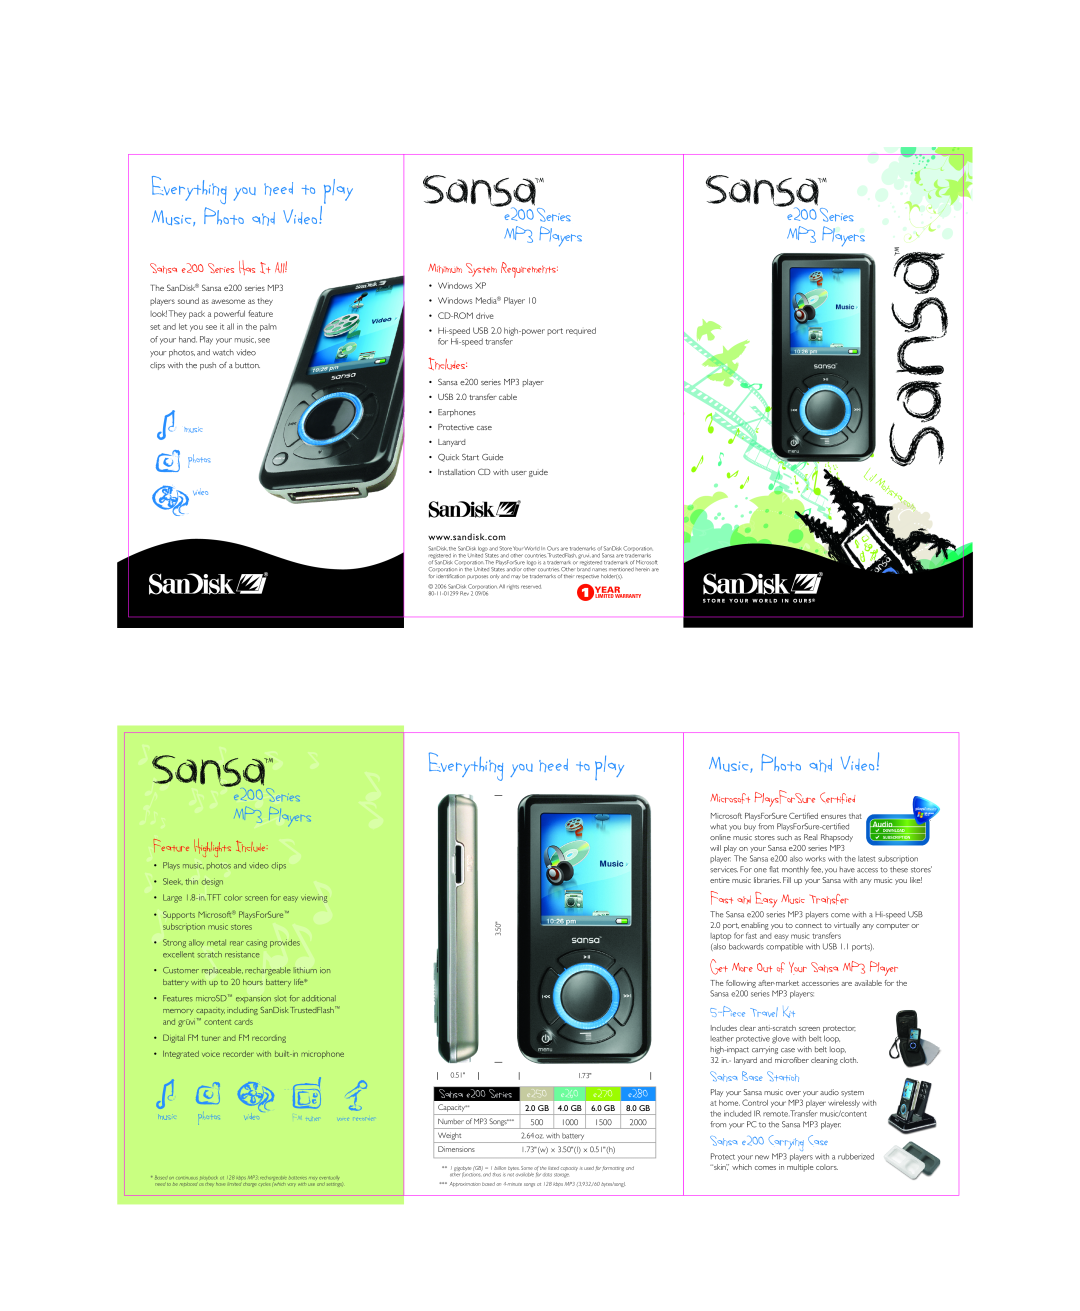 SanDisk E250 quick start Music, Photo and Video, Everything you need to play, e200 Series MP3 Players, Includes, music 